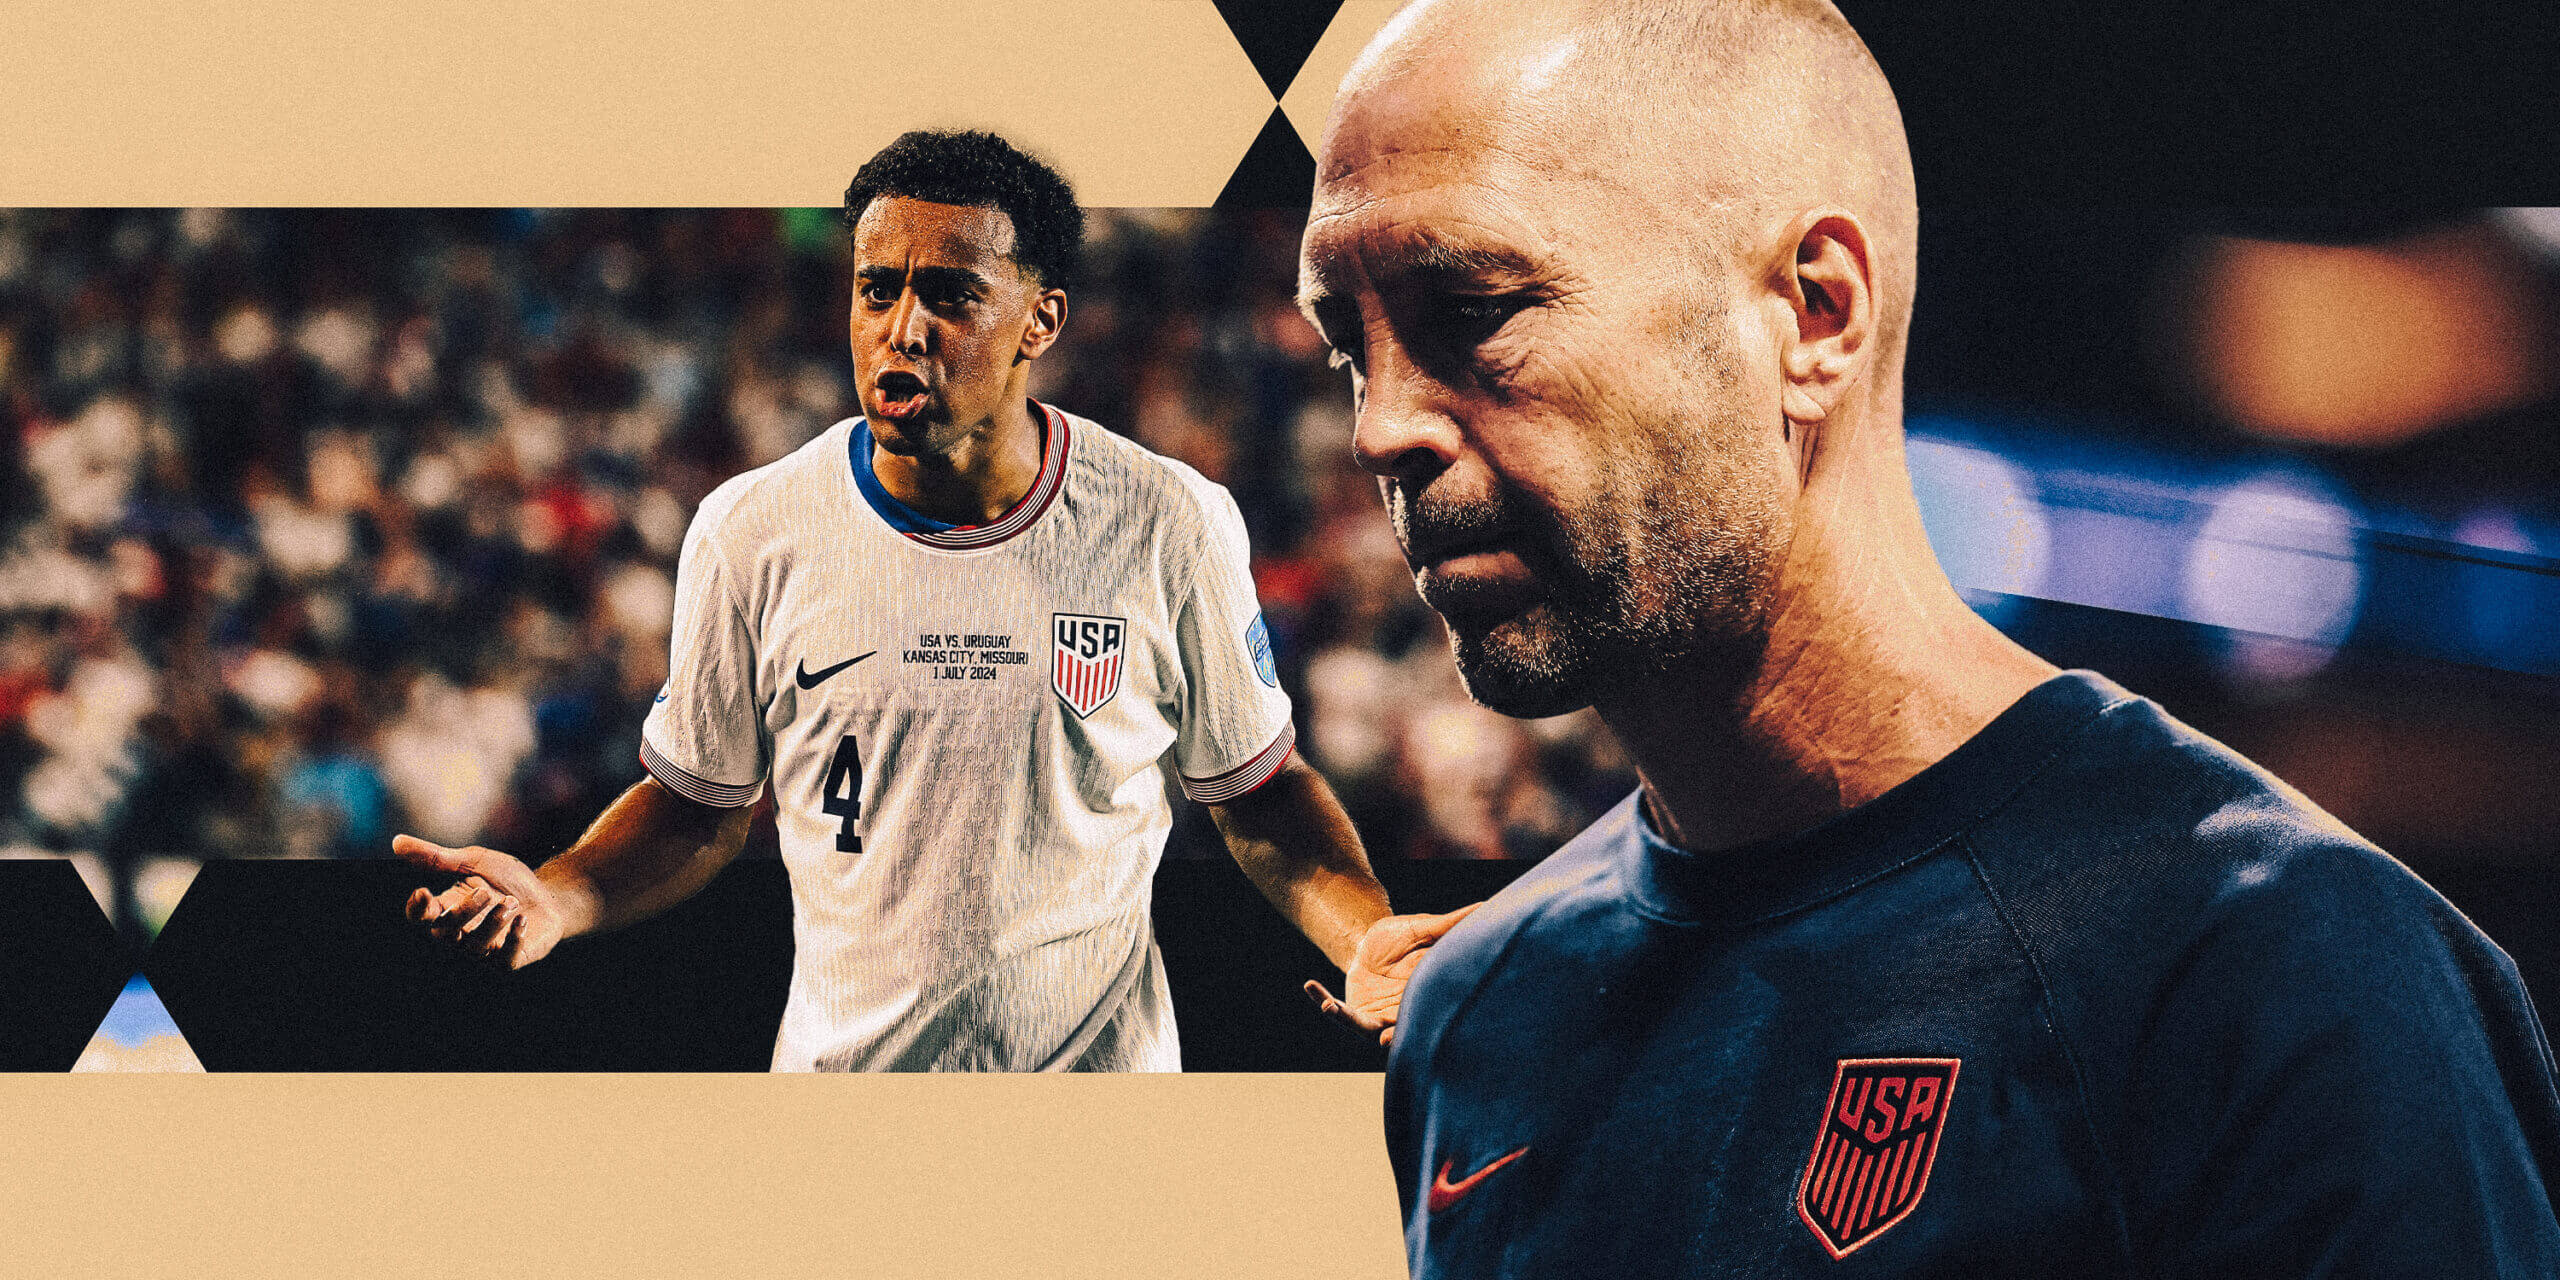 Inside the United States’ Copa América exit: ‘We must do better’